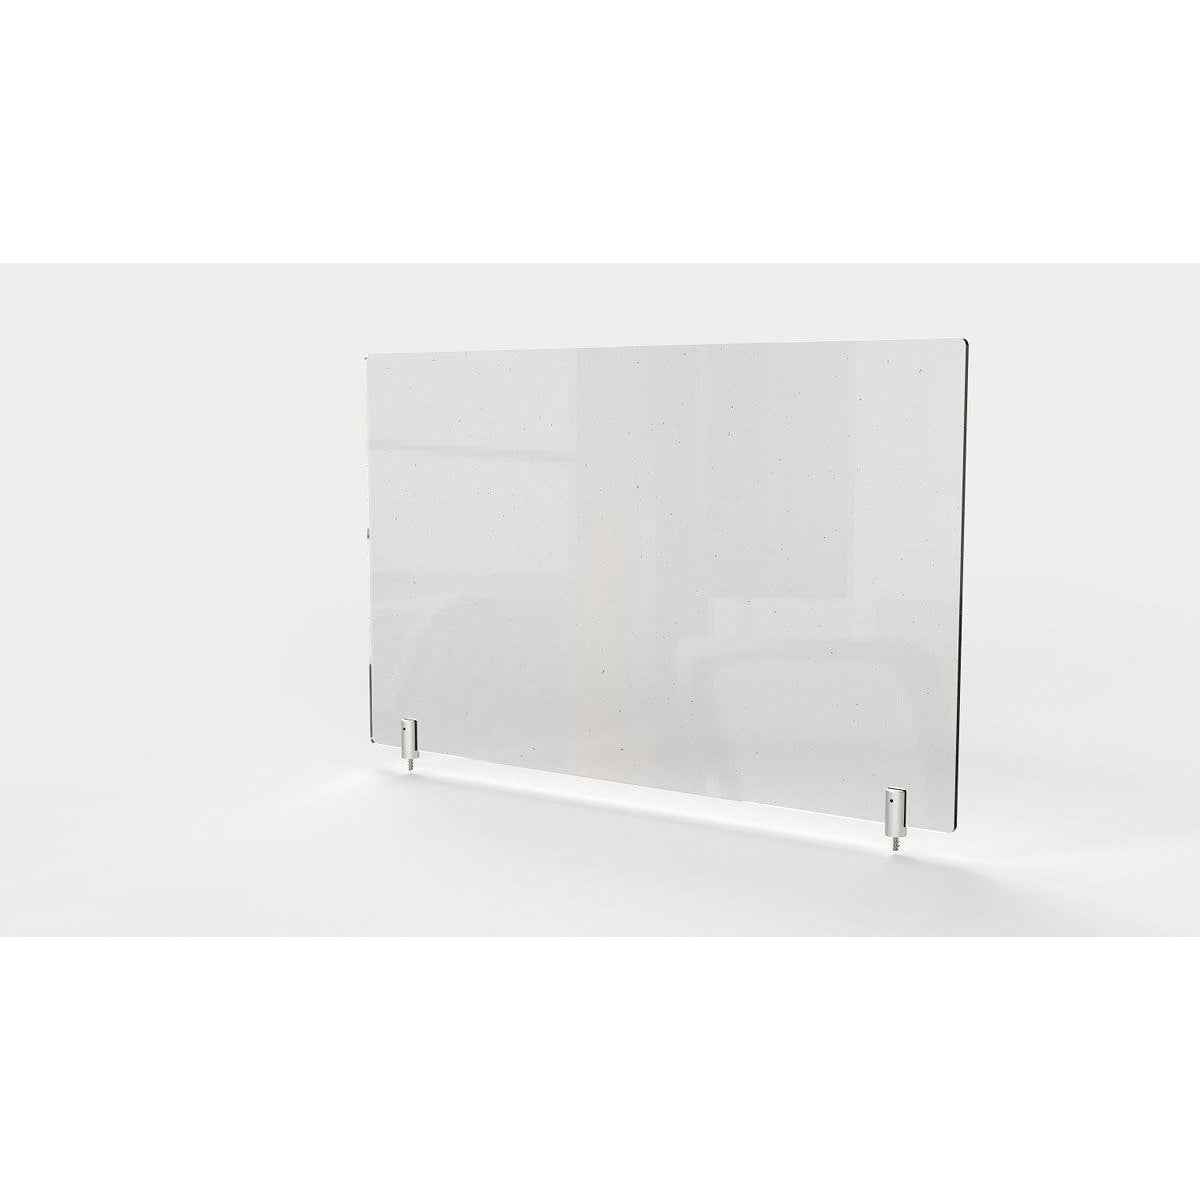 Clear Thermoplastic Partition & Cubicle Extender with Permanent Screw Attachment, 24"H x 29"W